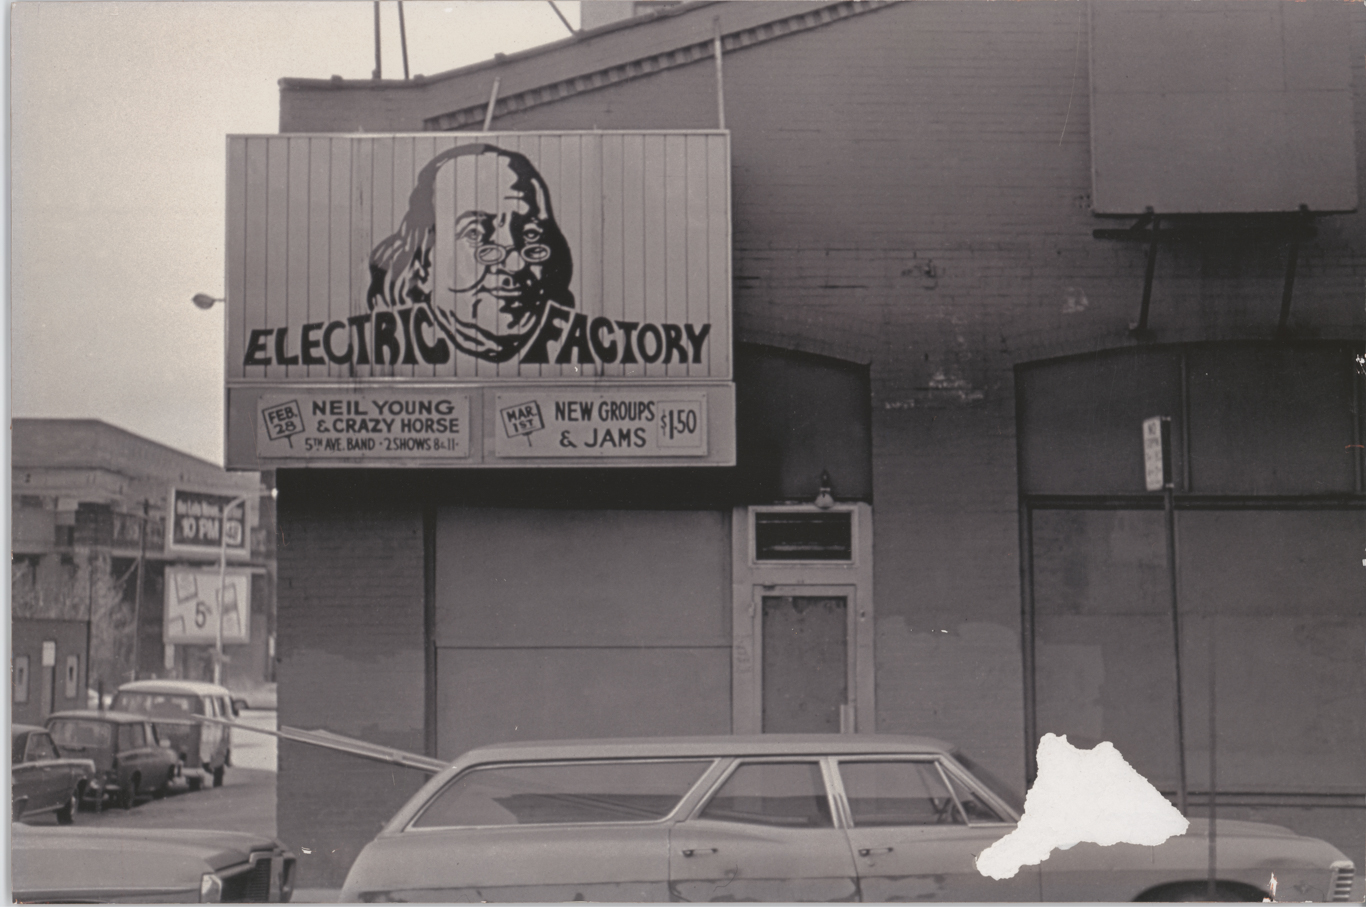 Photograph of exterior original Electric Factory with Ben Franklin sign